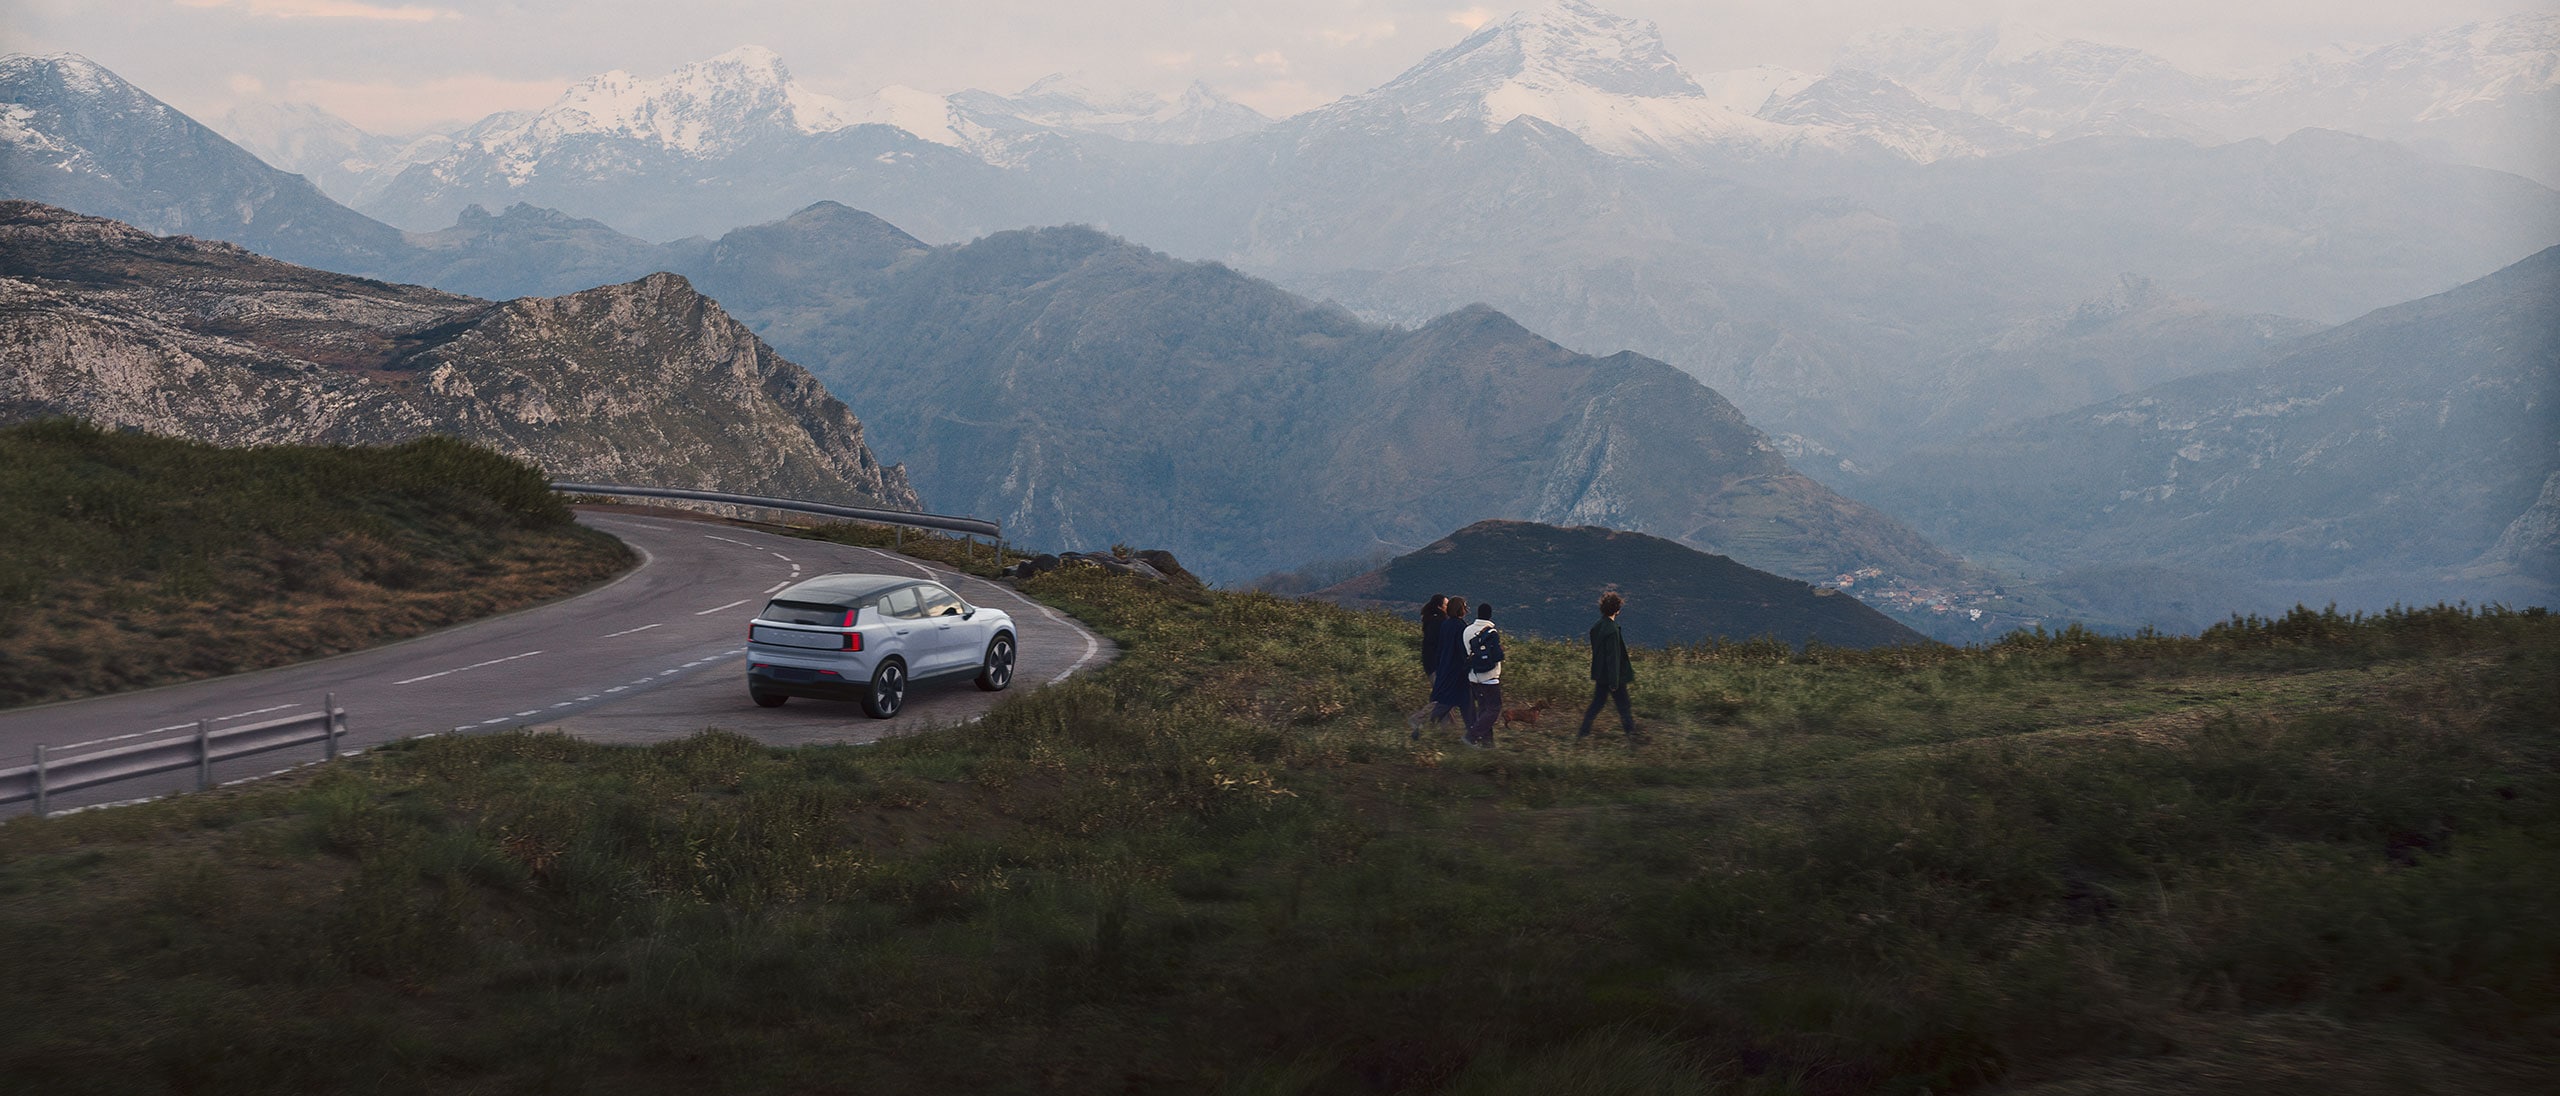 A fully electric Volvo car parked on the side of a beautiful mountainous landscape.